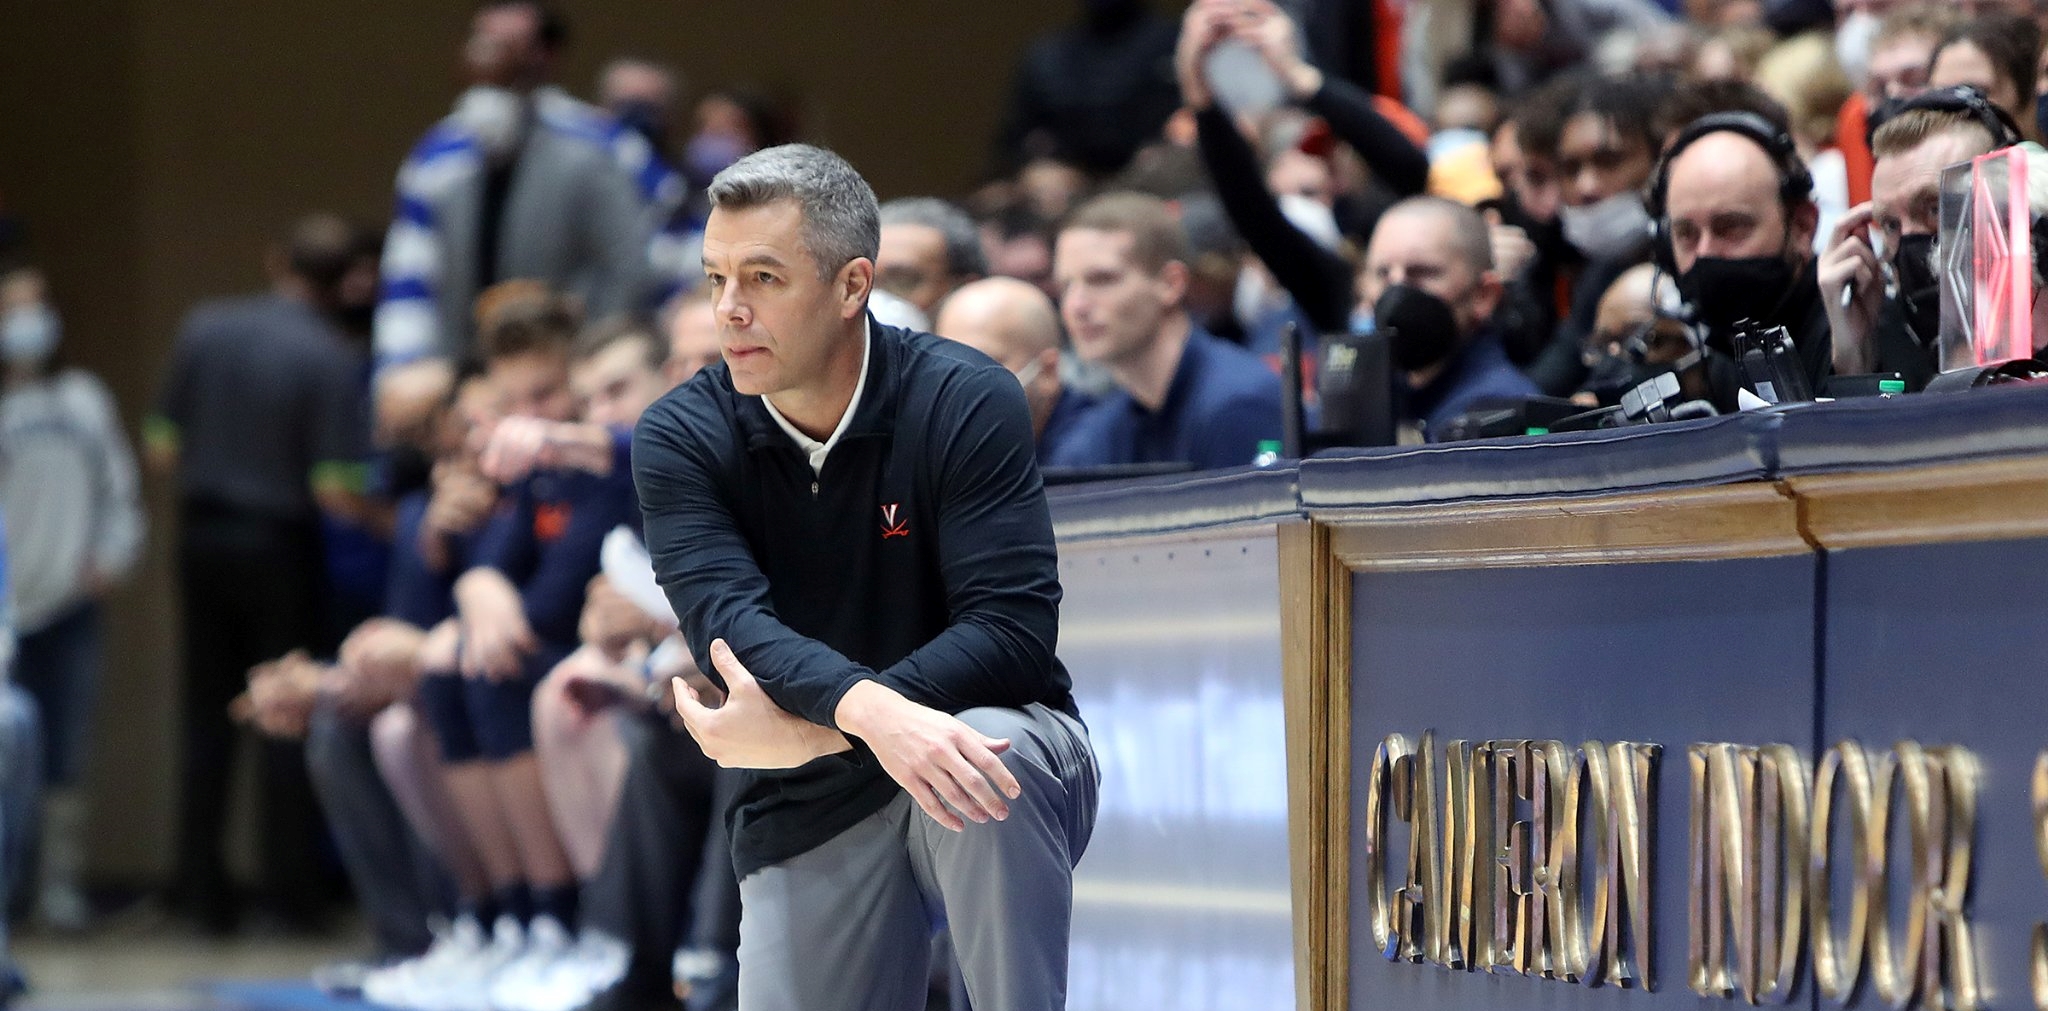 Virginia Listed in “First Four Out” in Multiple March Madness Projections